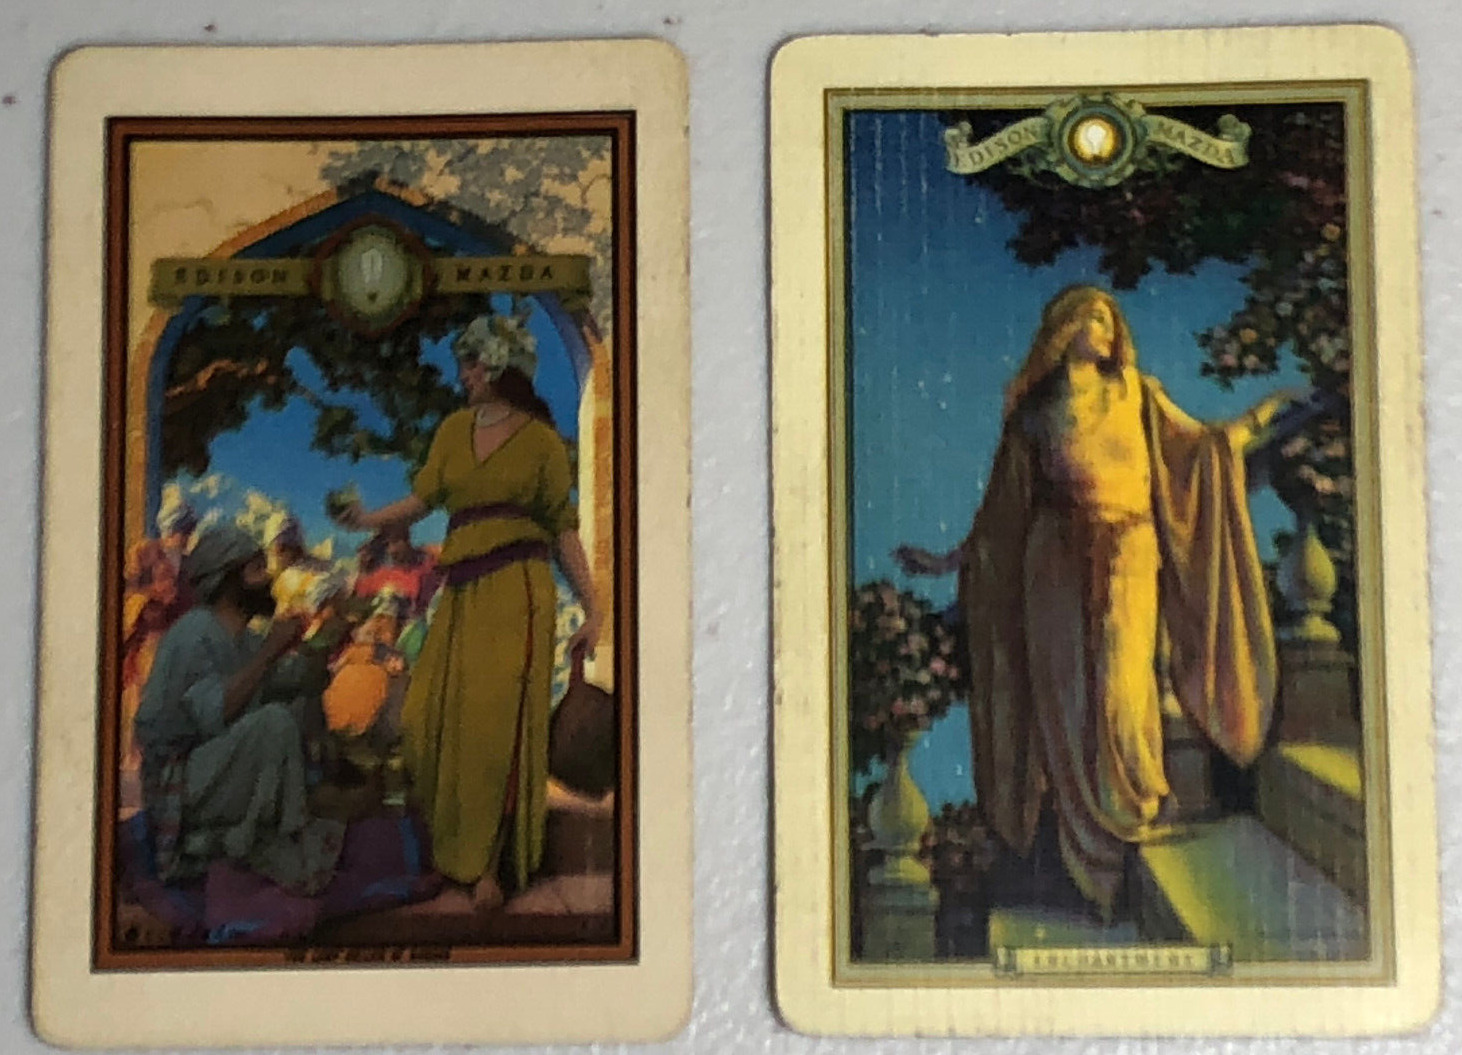 2 VINTAGE MAXFIELD PARRISH PLAYING CARDS ENCHANTMENT AND LAMP SELLER OF BAGDAD